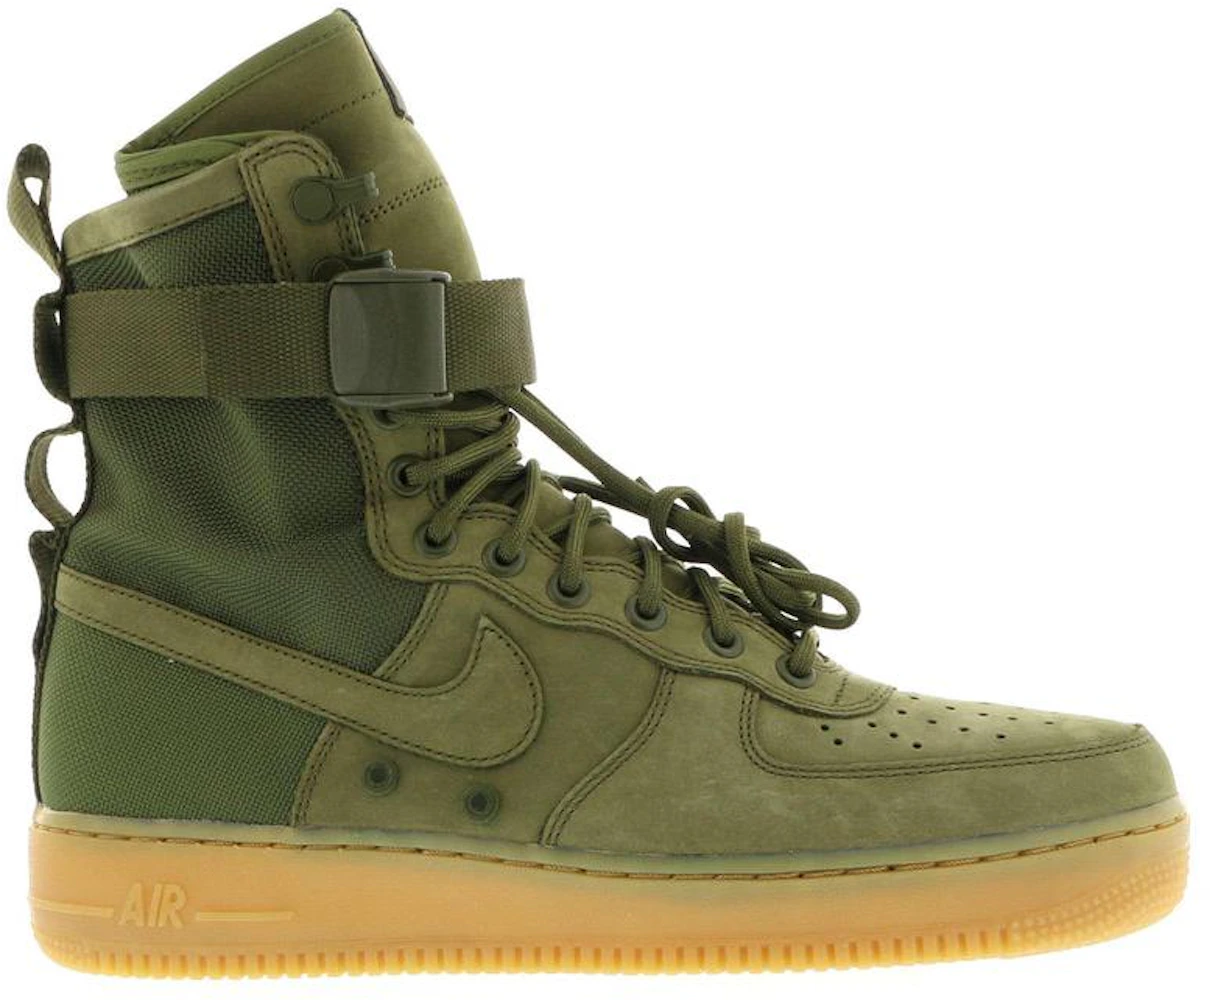 Nike Air 1 Faded Olive Men's 859202-339 - US